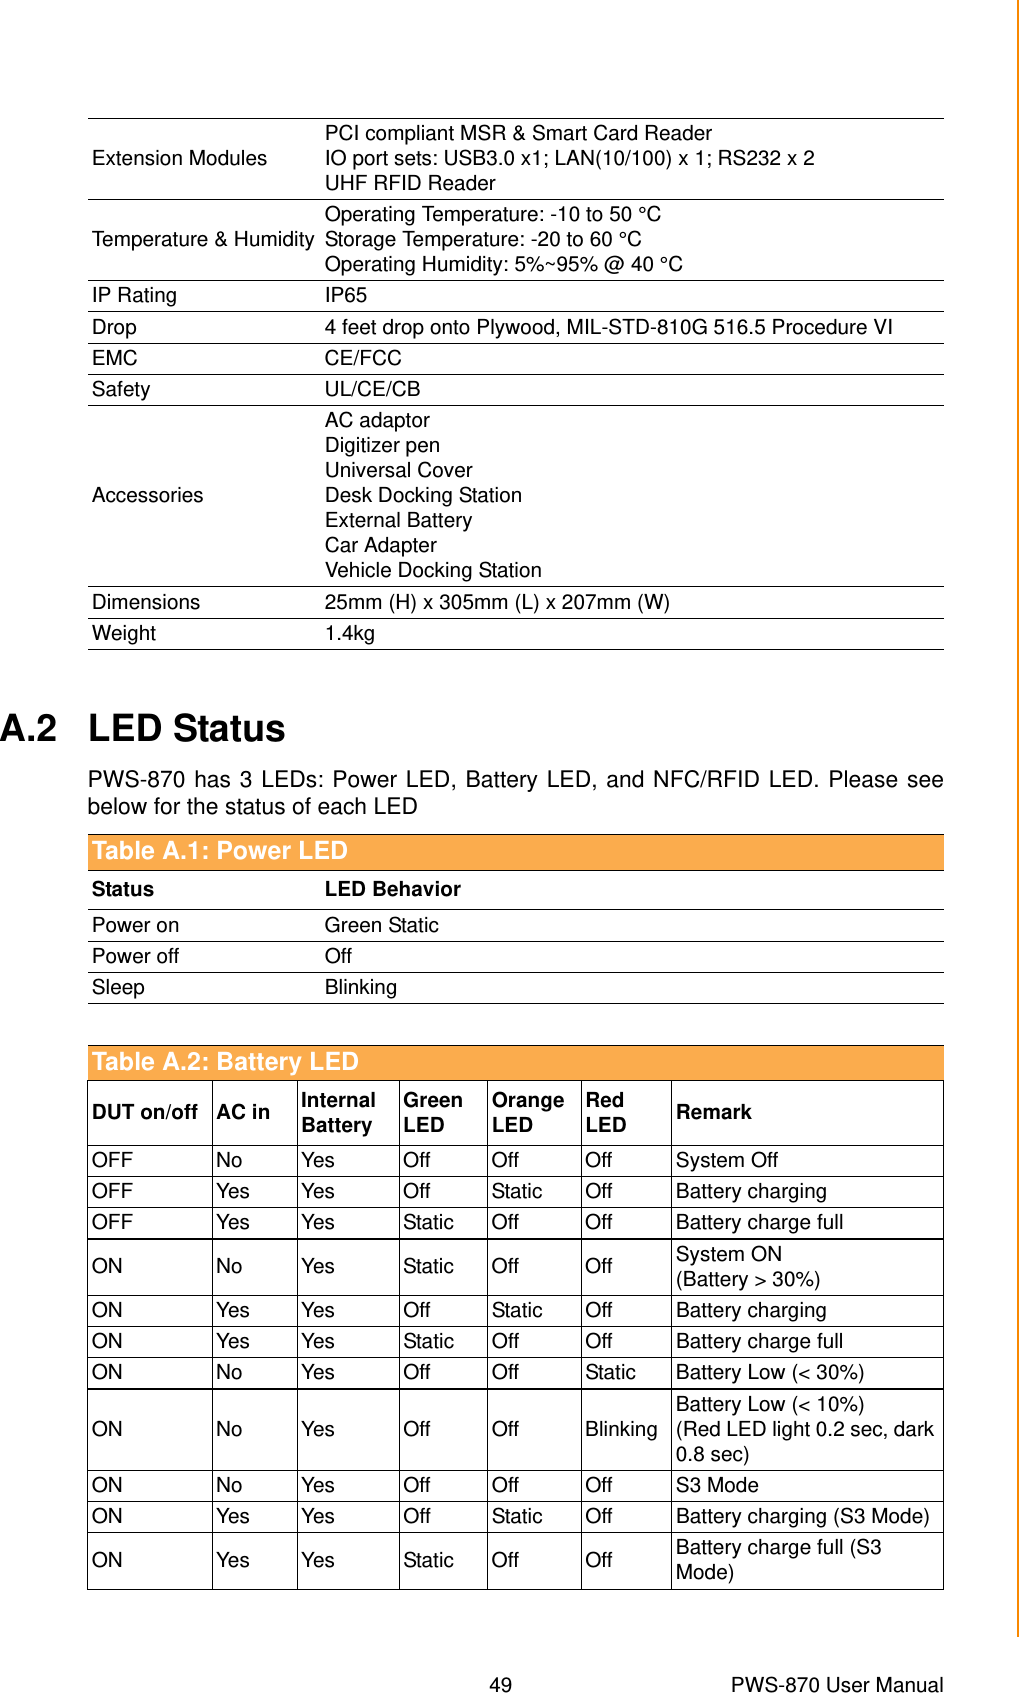 49 PWS-870 User ManualAppendix A SpecificationsA.2 LED StatusPWS-870 has 3 LEDs: Power LED, Battery LED, and NFC/RFID LED. Please seebelow for the status of each LEDExtension Modules PCI compliant MSR &amp; Smart Card ReaderIO port sets: USB3.0 x1; LAN(10/100) x 1; RS232 x 2UHF RFID ReaderTemperature &amp; Humidity Operating Temperature: -10 to 50 °CStorage Temperature: -20 to 60 °COperating Humidity: 5%~95% @ 40 °CIP Rating IP65Drop 4 feet drop onto Plywood, MIL-STD-810G 516.5 Procedure VIEMC CE/FCCSafety UL/CE/CBAccessoriesAC adaptorDigitizer penUniversal CoverDesk Docking StationExternal BatteryCar AdapterVehicle Docking StationDimensions  25mm (H) x 305mm (L) x 207mm (W)Weight 1.4kgTable A.1: Power LEDStatus LED BehaviorPower on Green StaticPower off OffSleep BlinkingTable A.2: Battery LEDDUT on/off AC in Internal Battery Green LED Orange LED Red LED RemarkOFF No Yes Off Off Off System OffOFF Yes Yes Off Static Off Battery chargingOFF Yes Yes Static Off Off Battery charge fullON No Yes Static Off Off System ON (Battery &gt; 30%)ON Yes Yes Off Static Off Battery chargingON Yes Yes Static Off Off Battery charge fullON No Yes Off Off Static Battery Low (&lt; 30%)ON No Yes Off Off Blinking Battery Low (&lt; 10%)(Red LED light 0.2 sec, dark 0.8 sec)ON No Yes Off Off Off S3 ModeON Yes Yes Off Static Off Battery charging (S3 Mode)ON Yes Yes Static Off Off Battery charge full (S3 Mode)